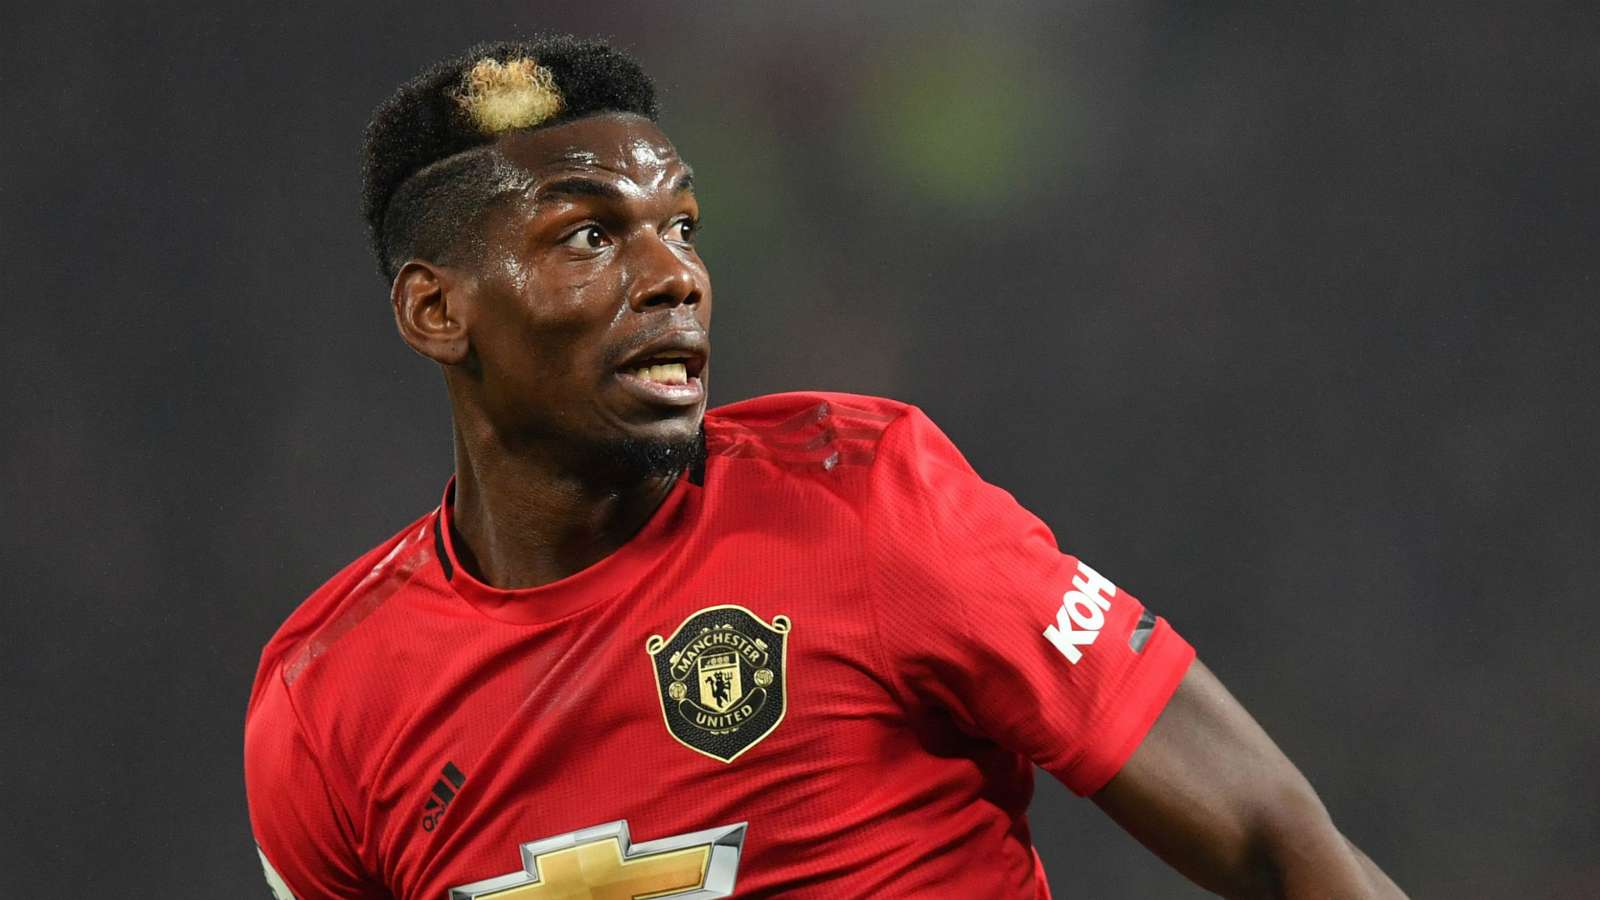 Man Utd Transfers: 5 Central Midfielders the Red Devils Could Realistically Target This Summer - Bóng Đá